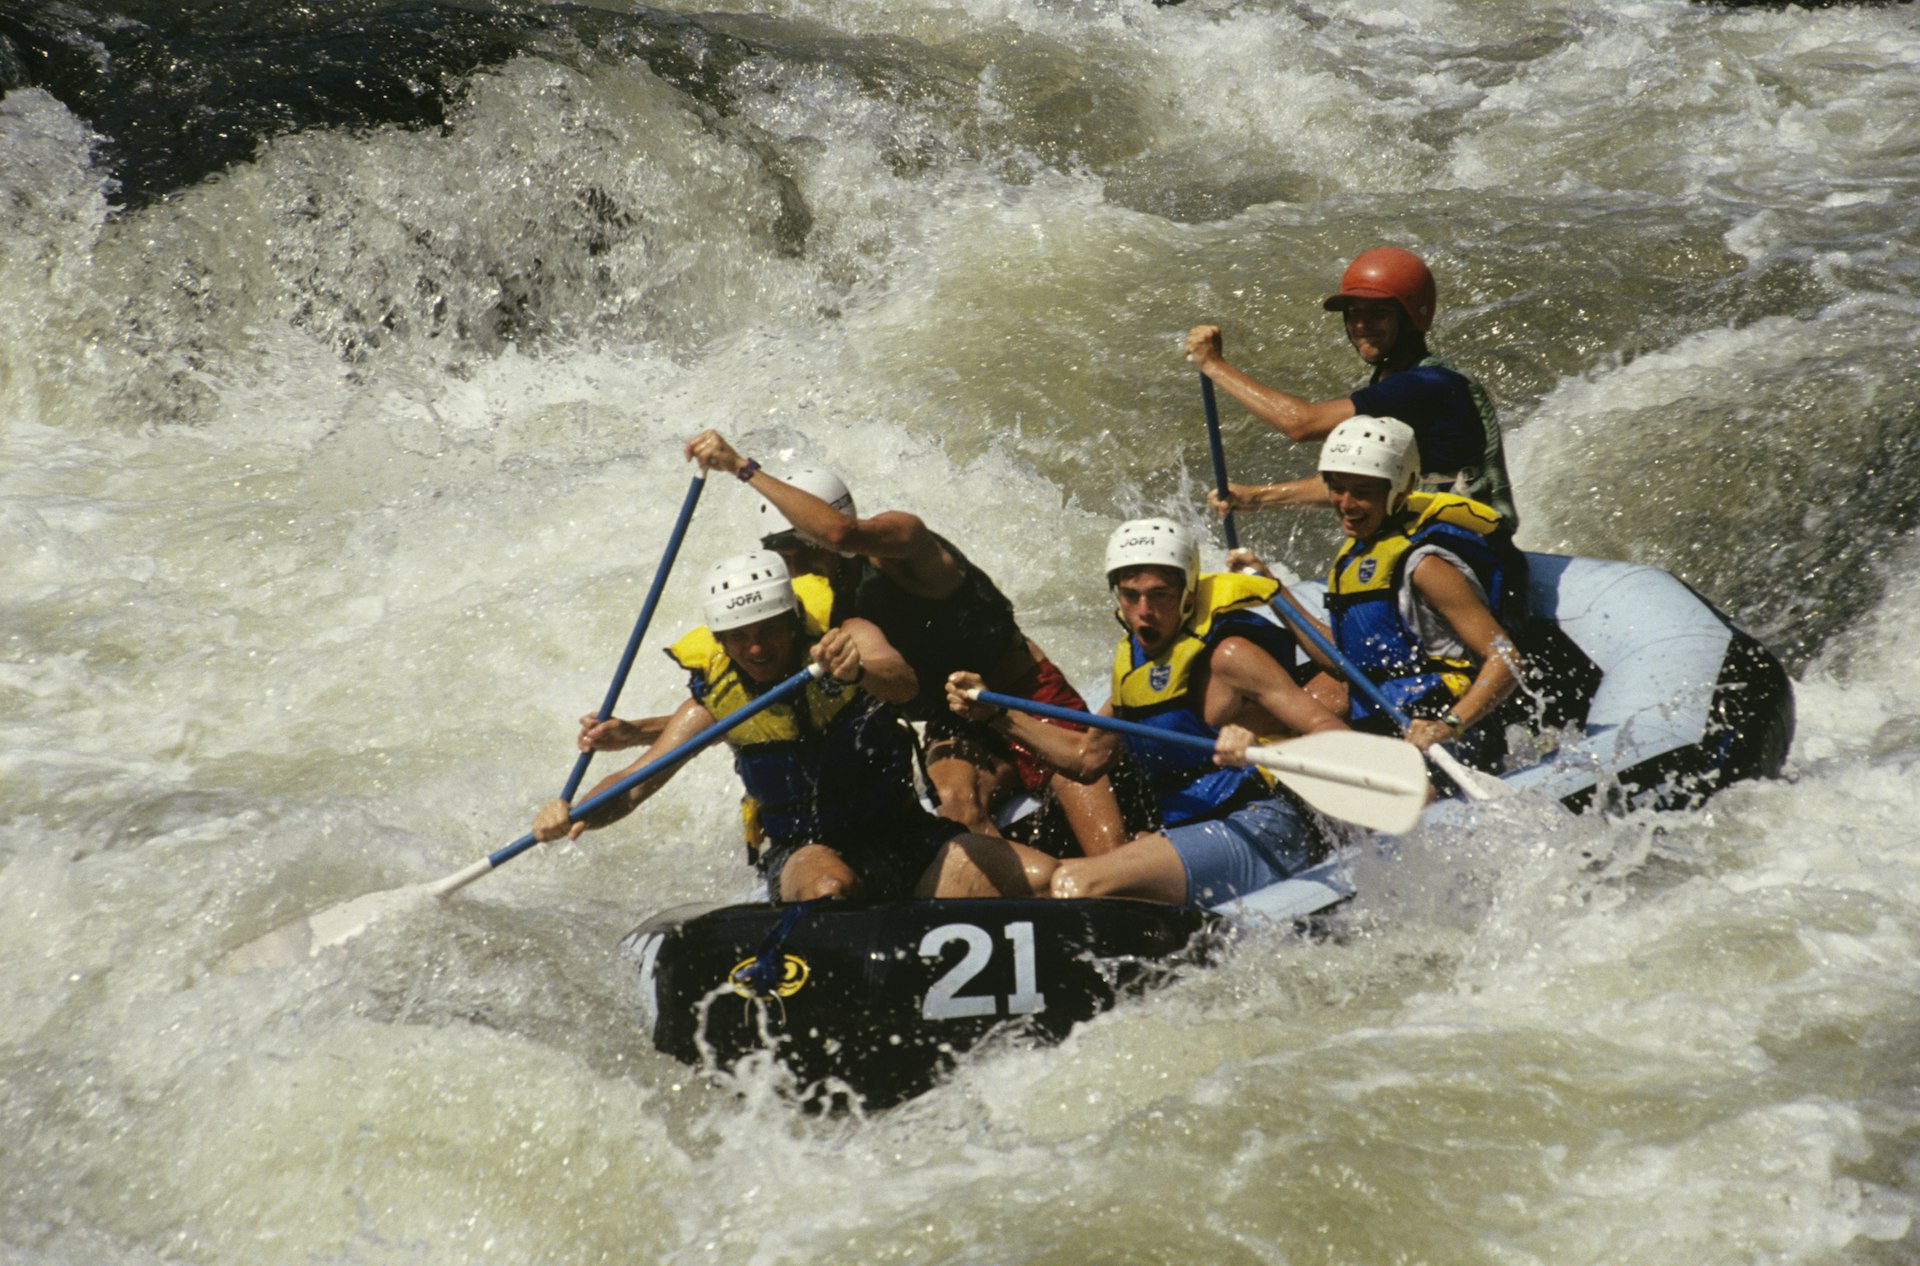 A group of people whitewater rafting on the Chattooga River